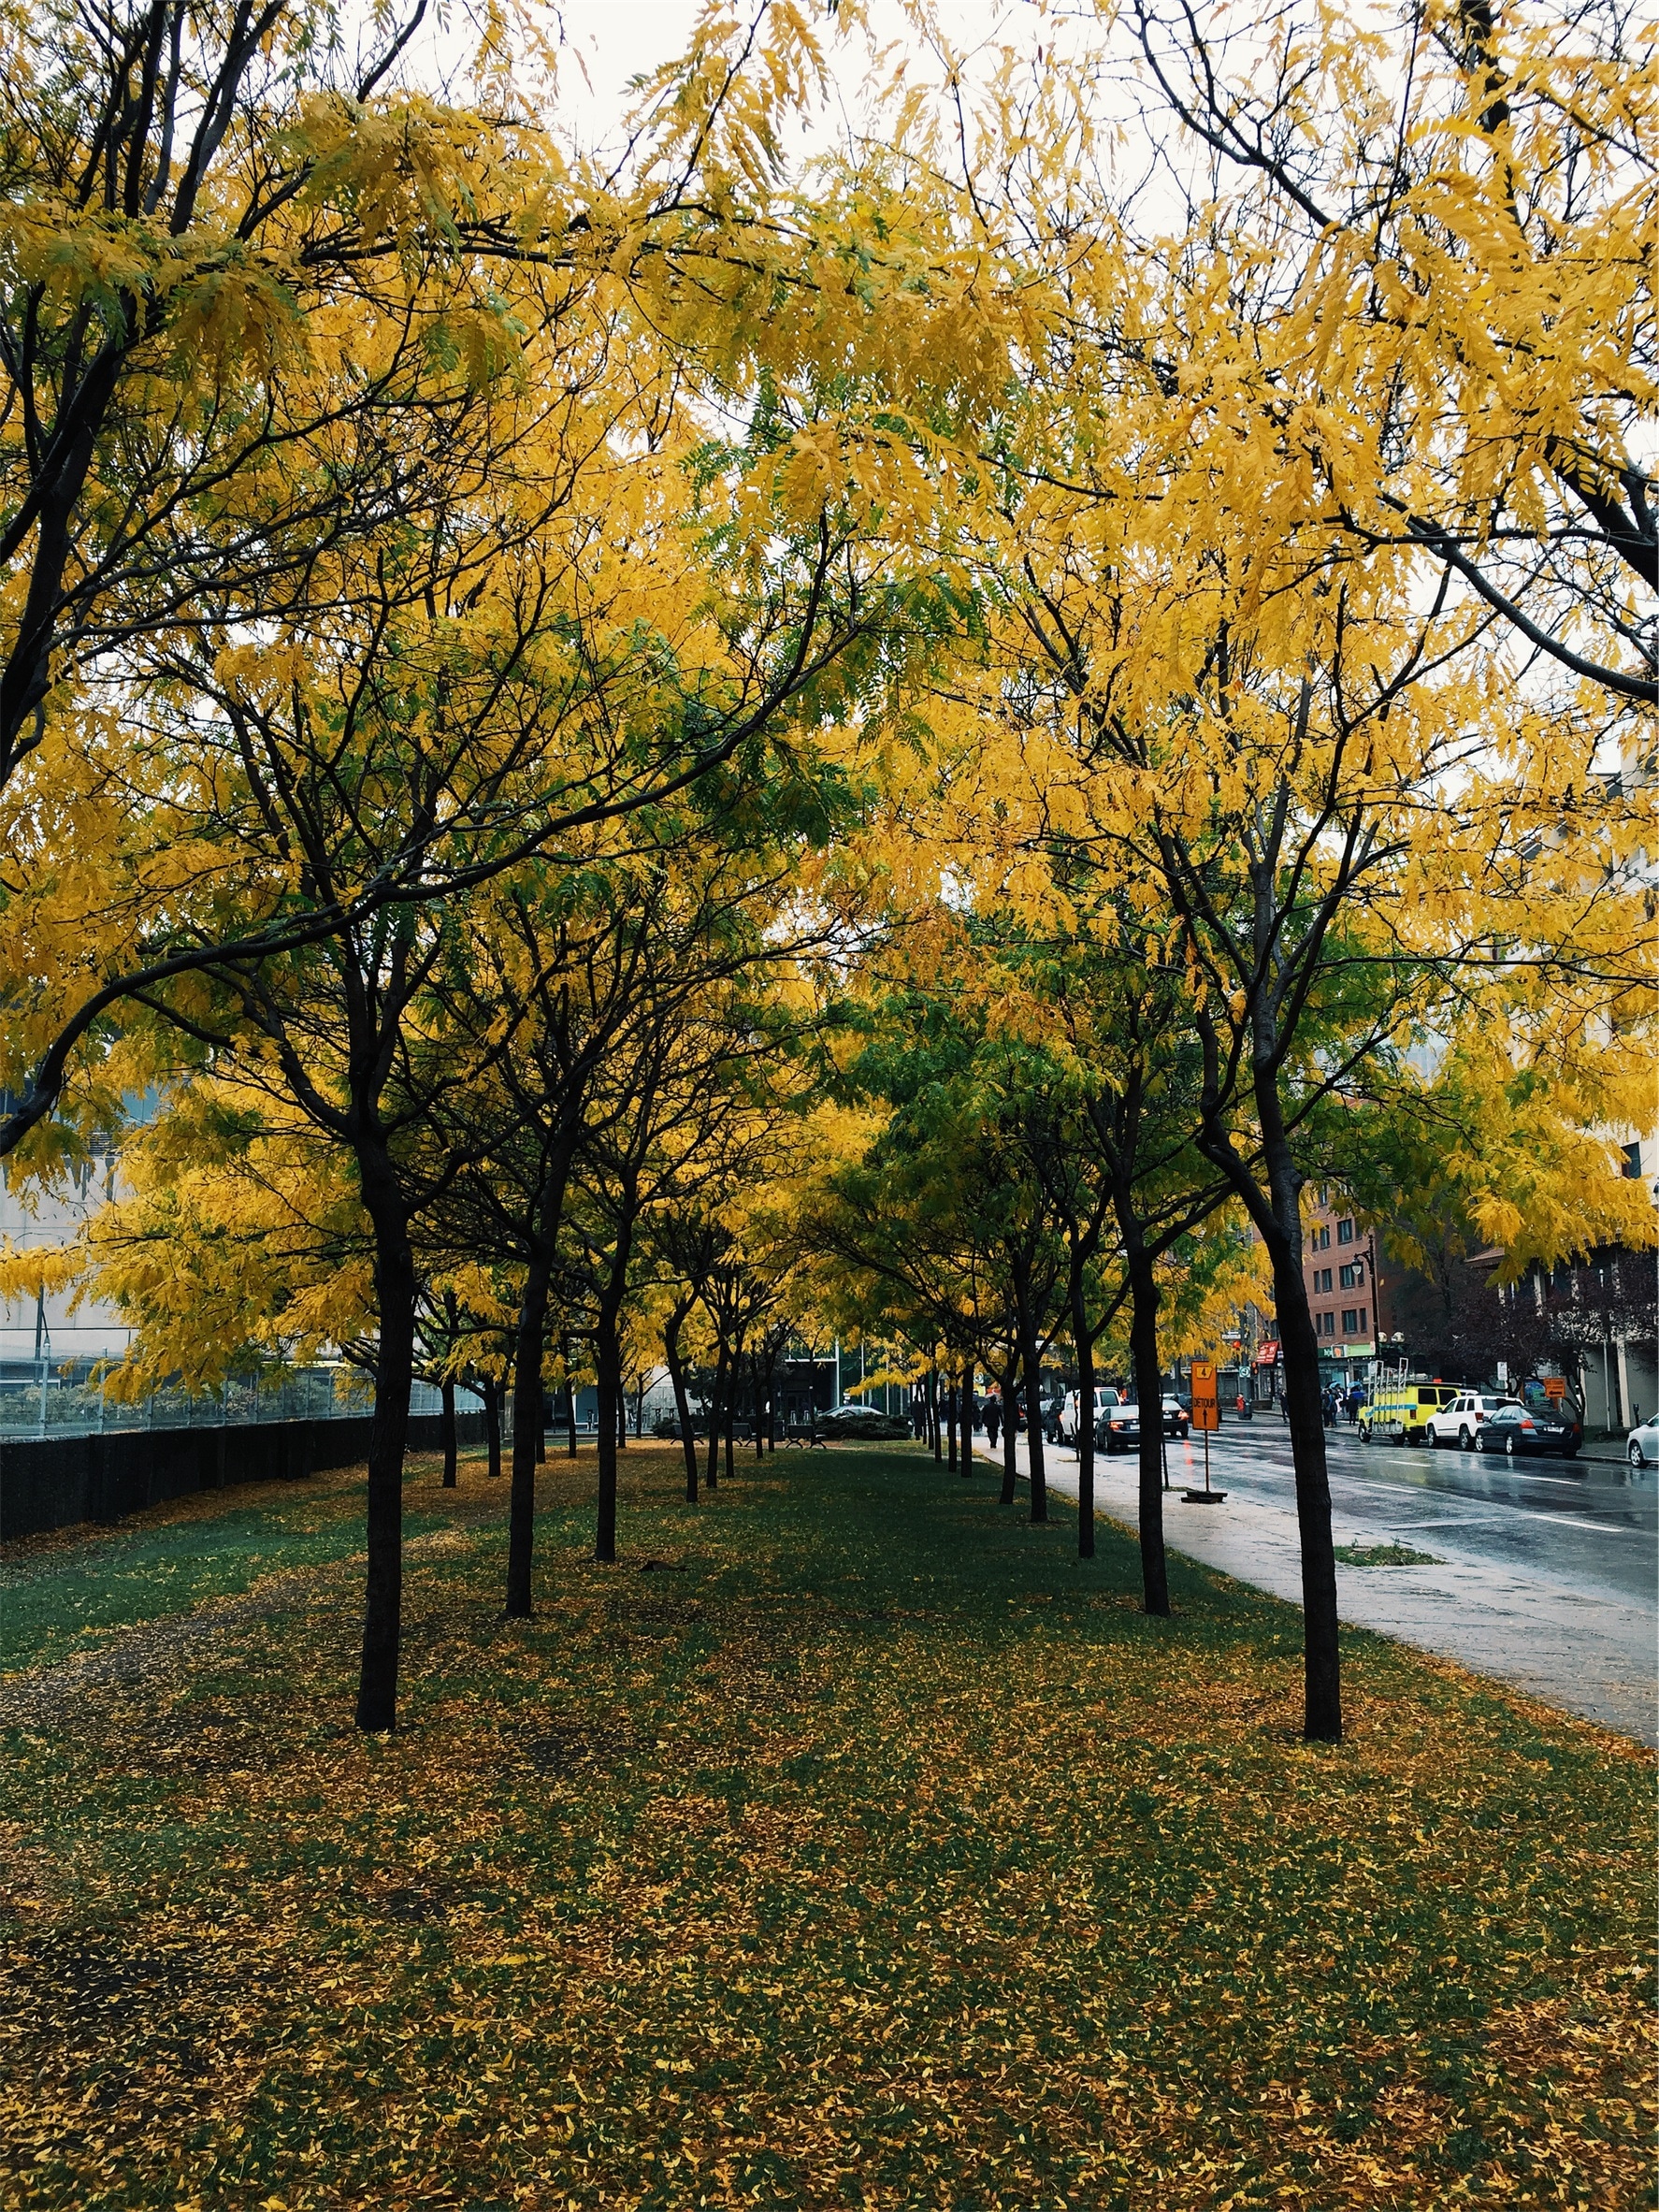 yellow and green trees